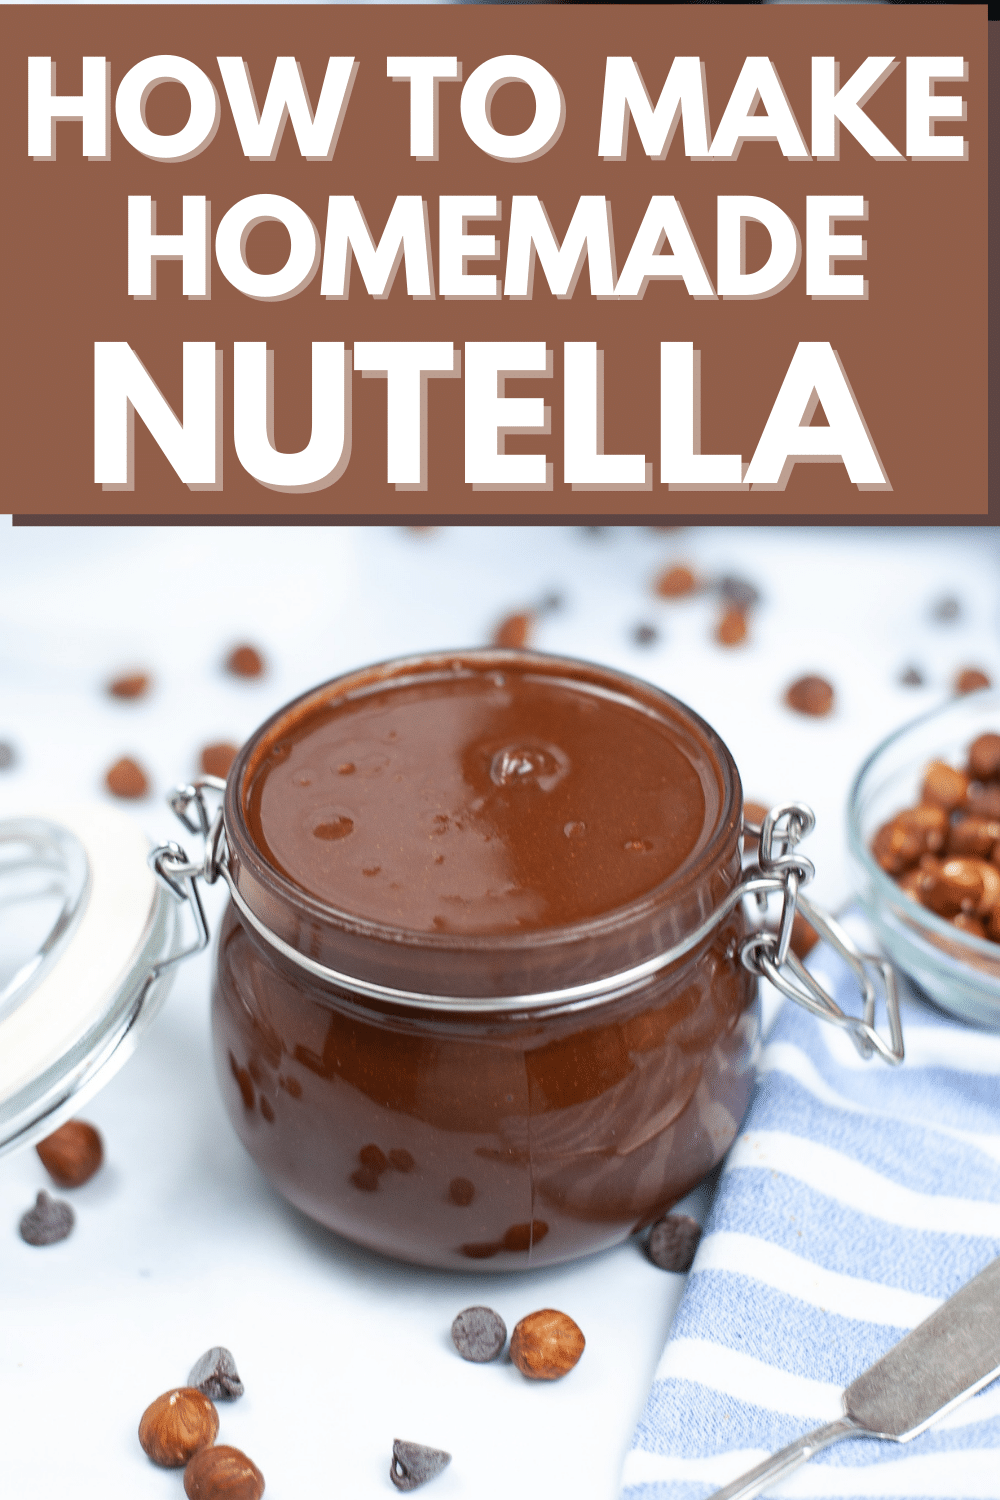 If you love Nutella, you’re going to love these directions on How To Make Homemade Nutella. It’s easy to make and tastes like the real thing! #nutella #homemadenutella #recipe via @wondermomwannab